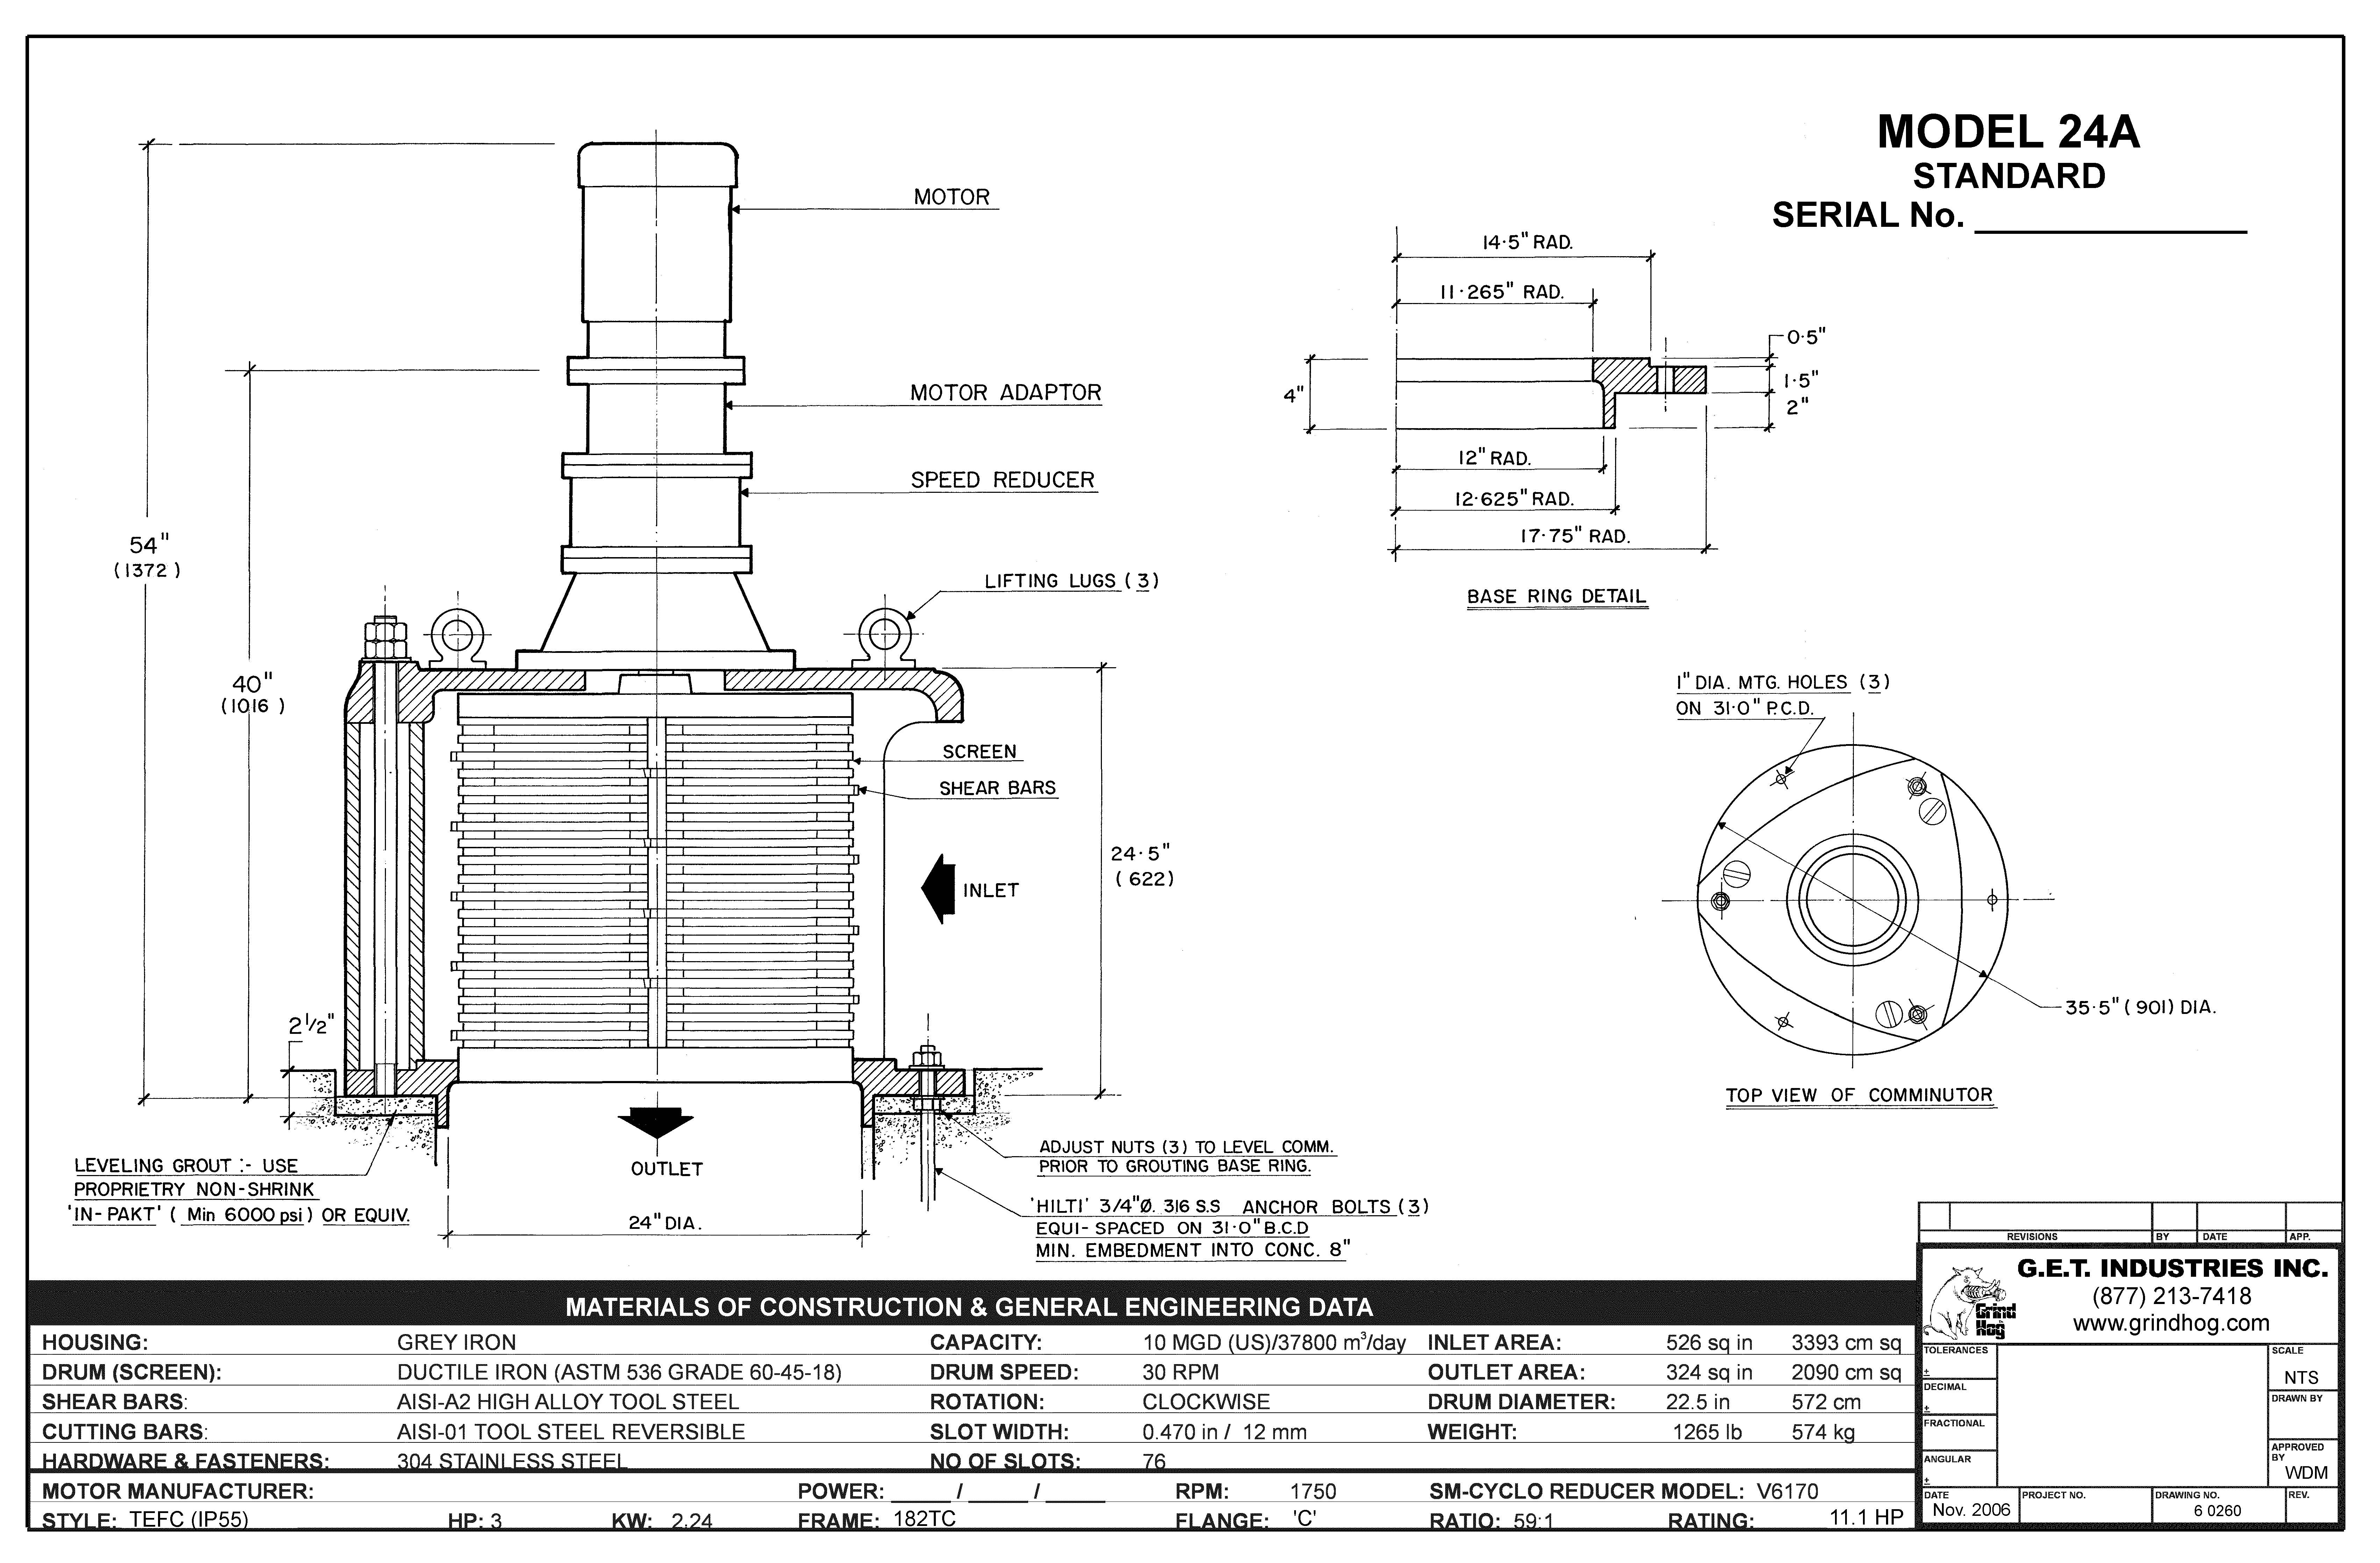 data drawing for Model 24A